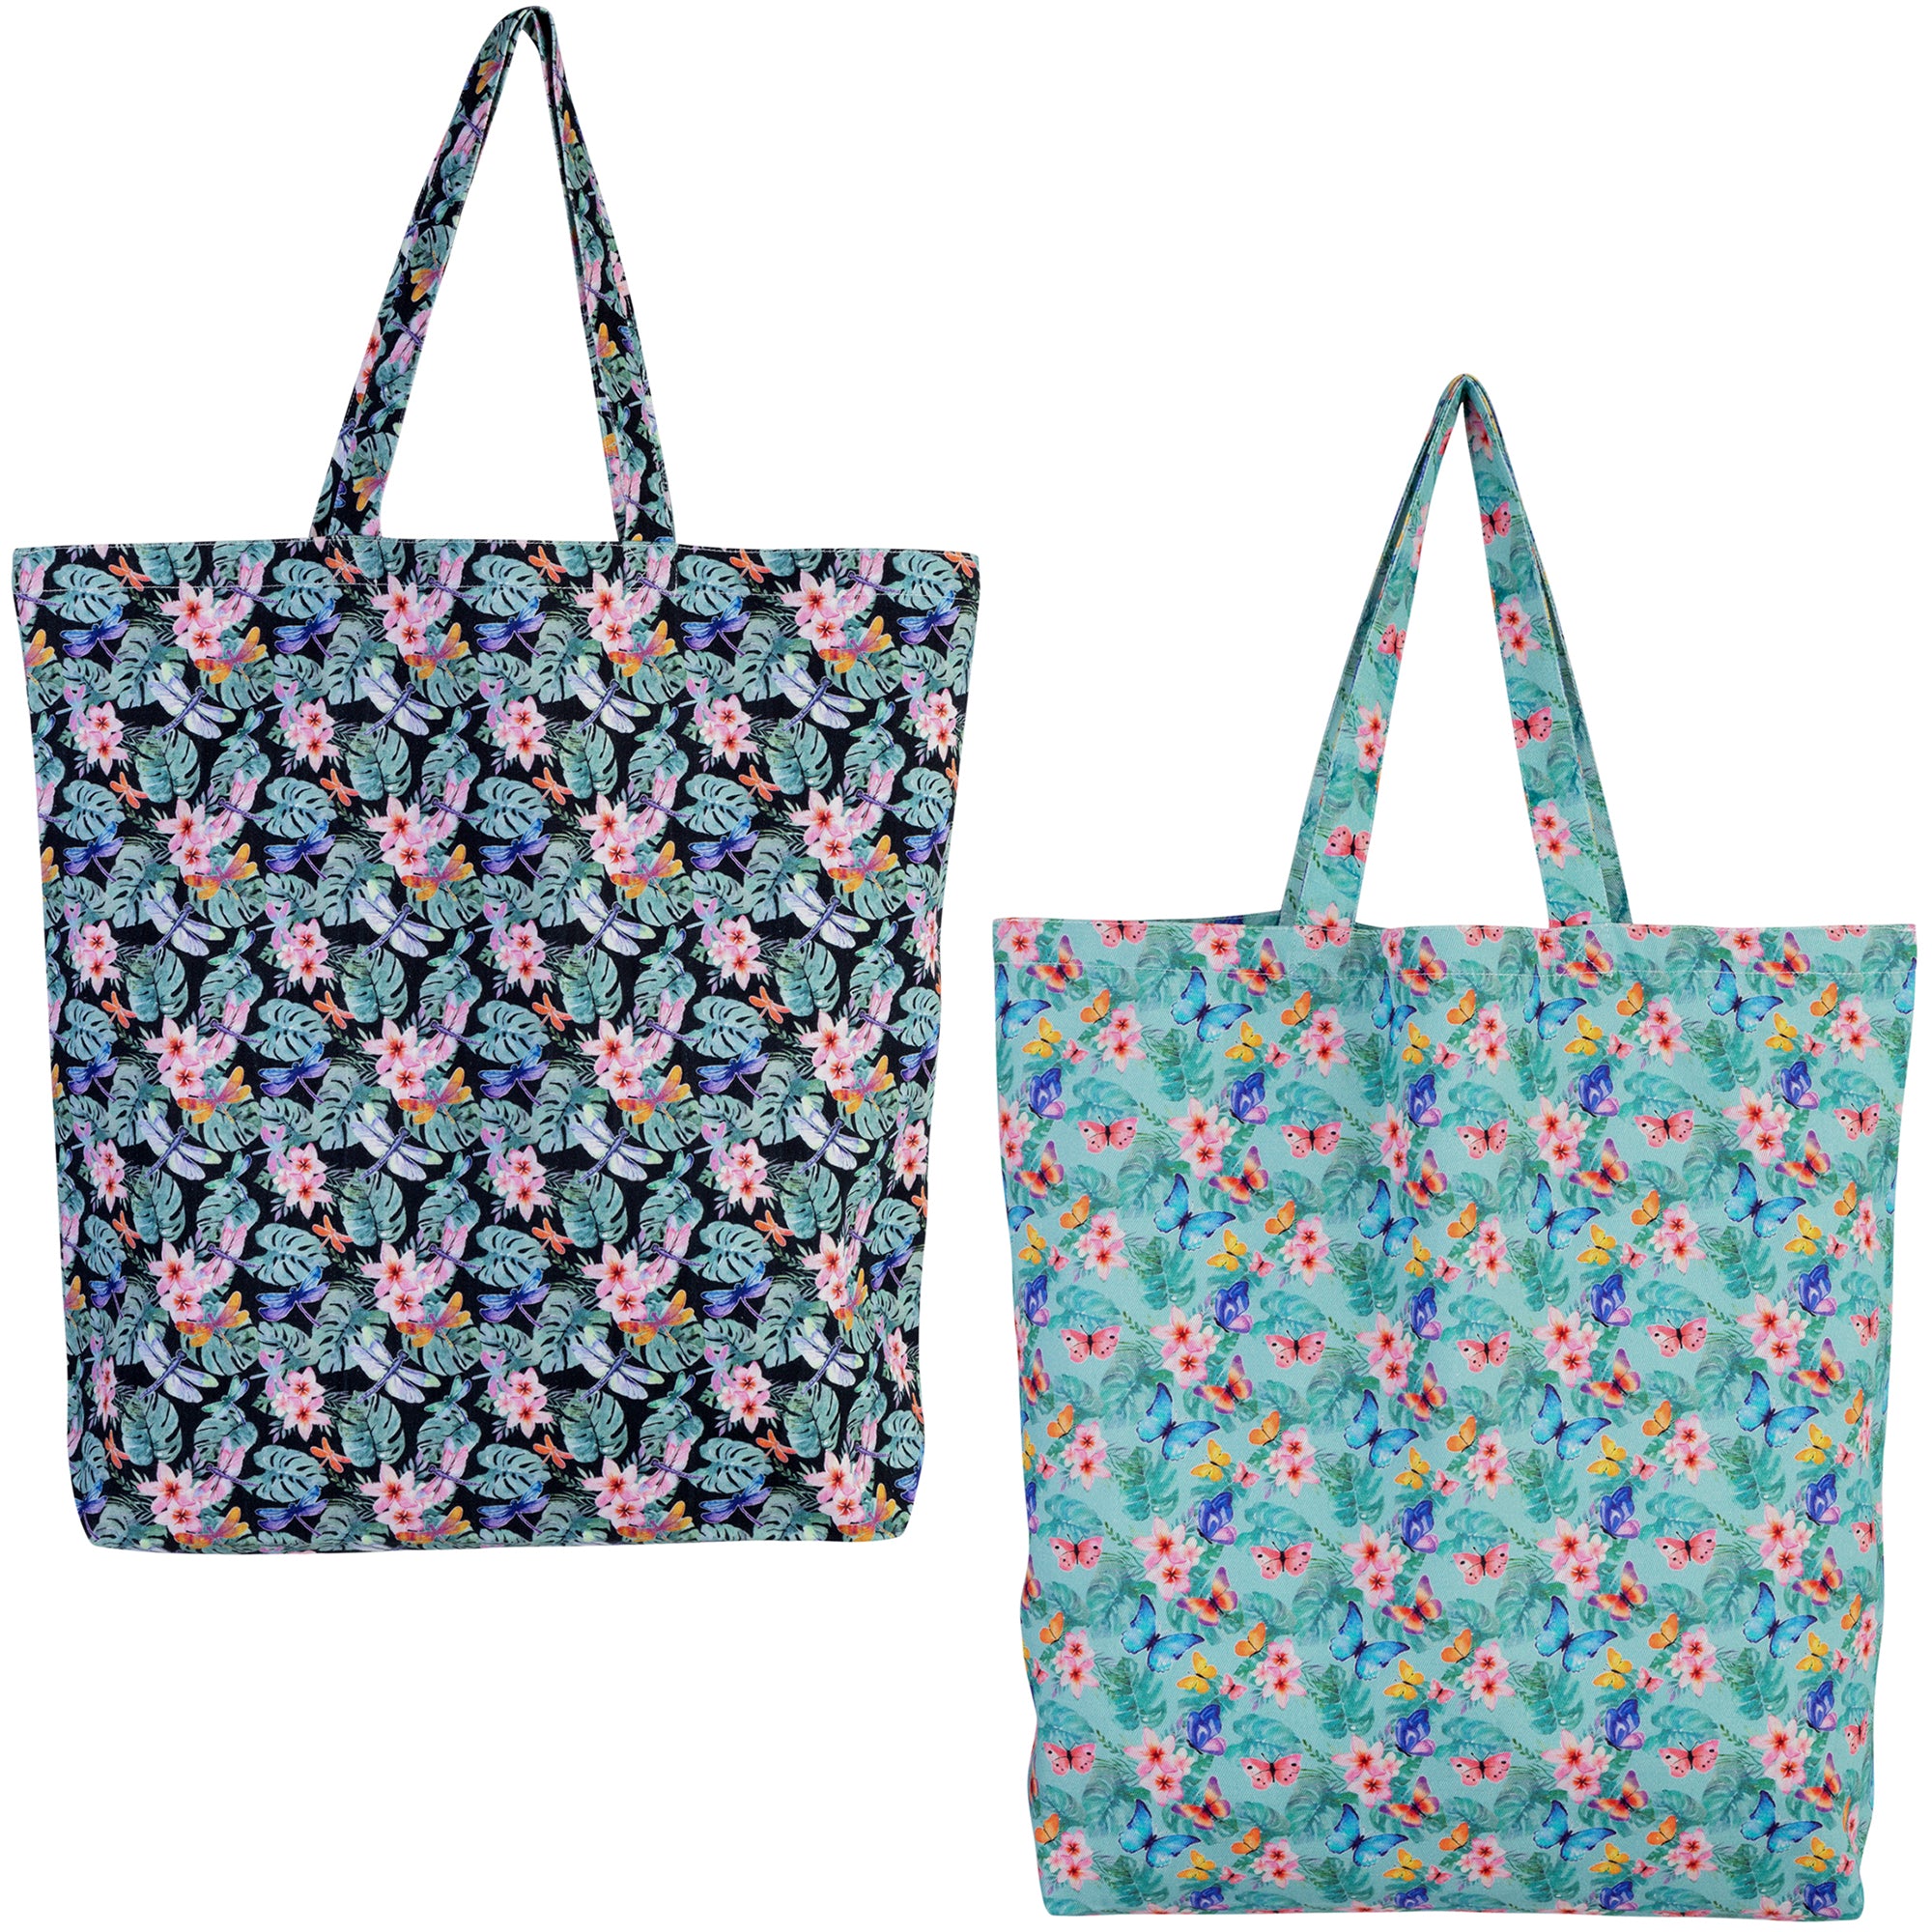 Garden Friend Tote Bag - Tropical Butterfly